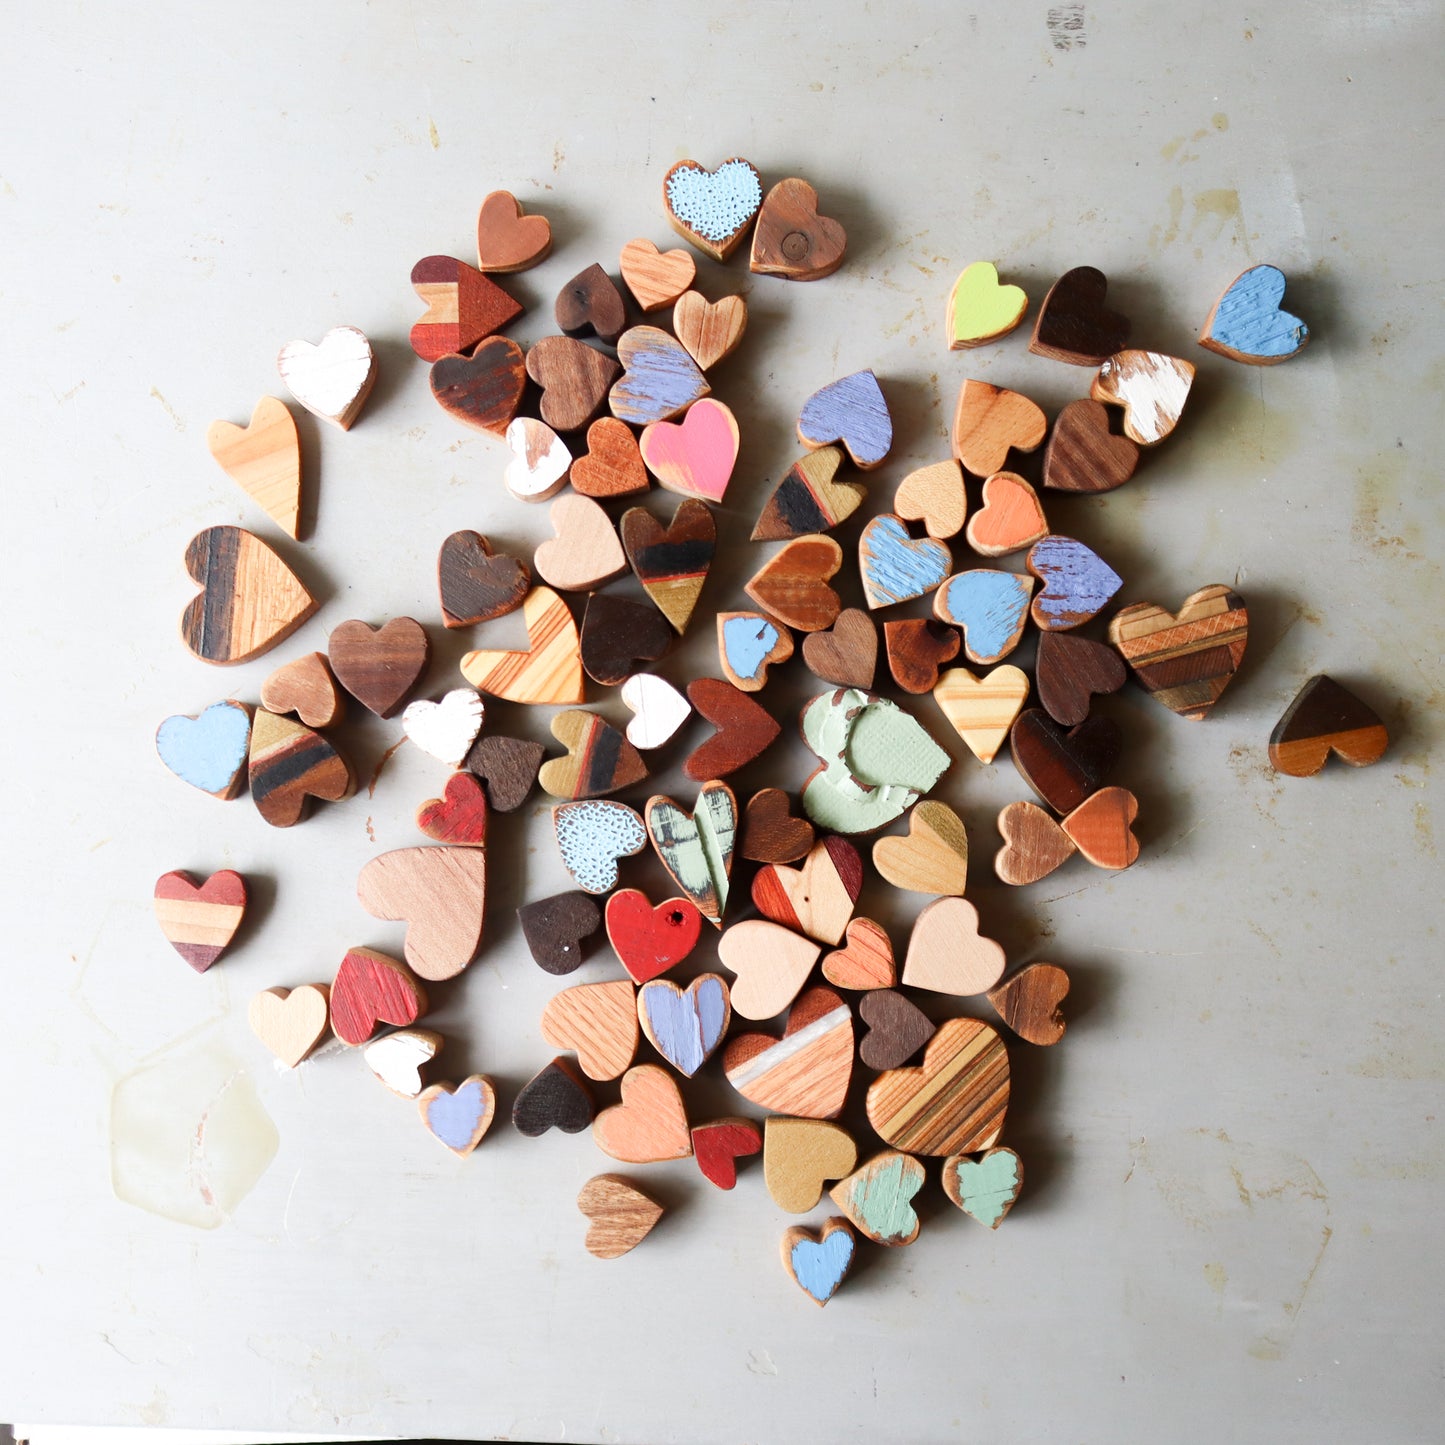 More Little Hearts